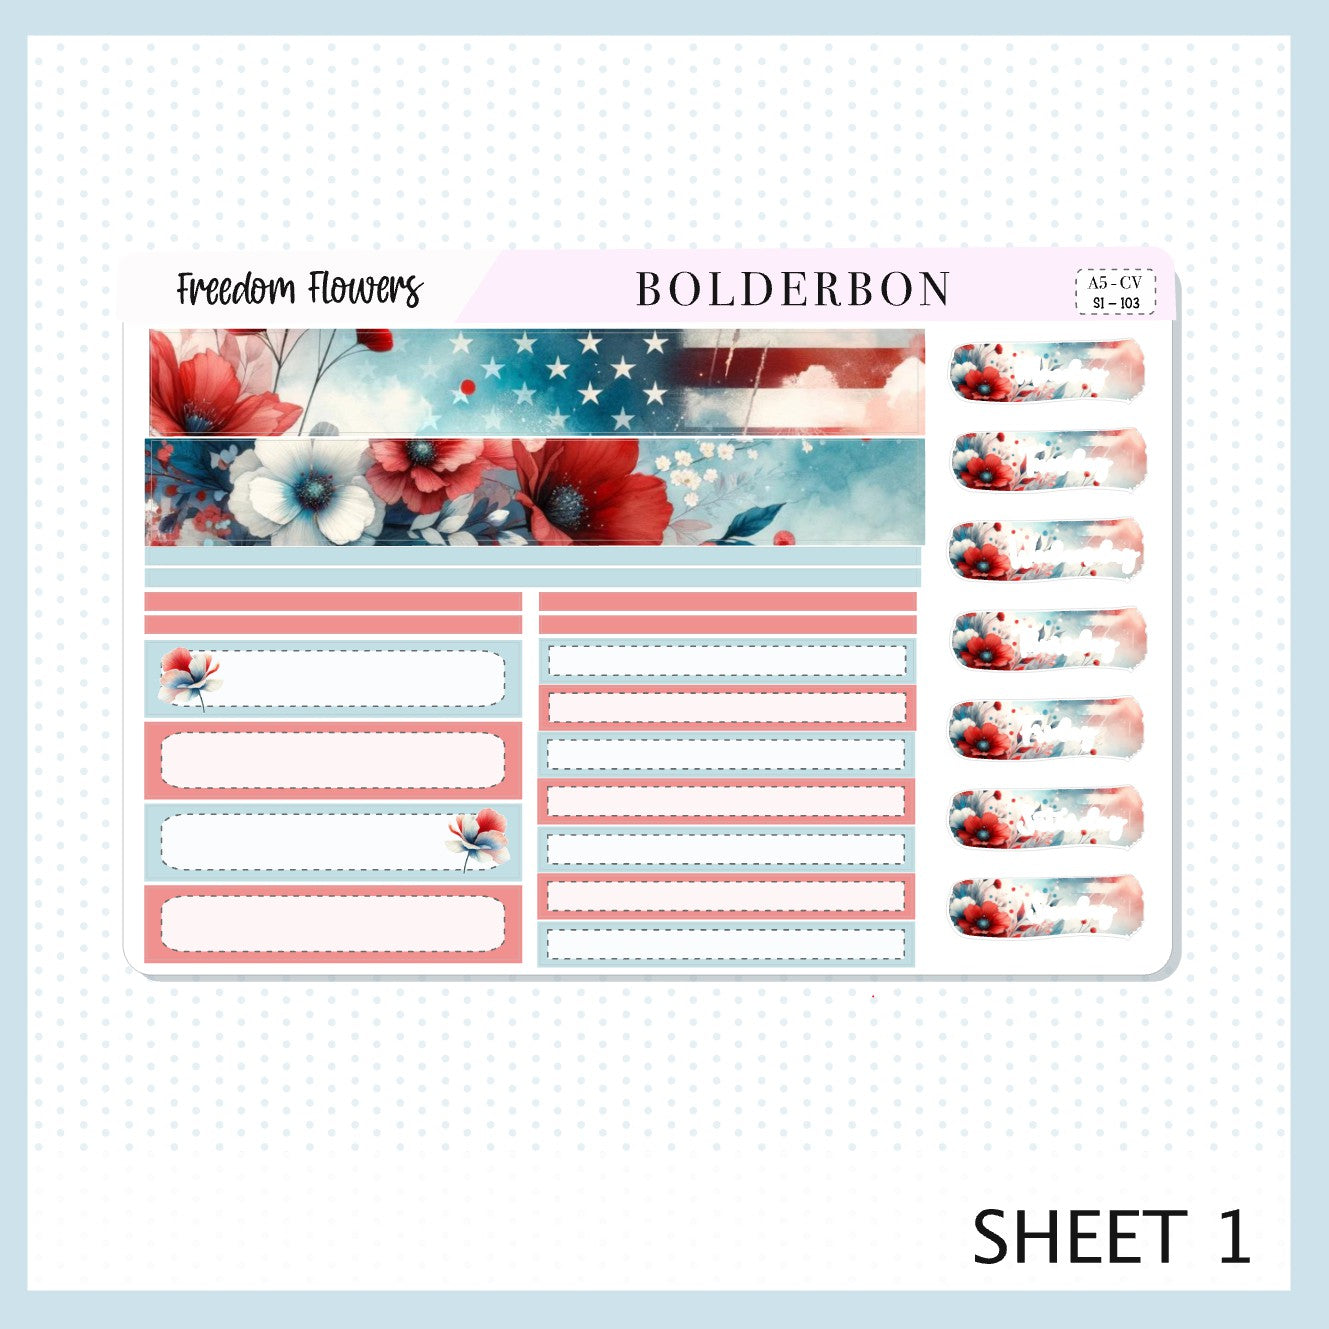 FREEDOM FLOWERS "Compact Vertical" || A5 Planner Sticker Kit